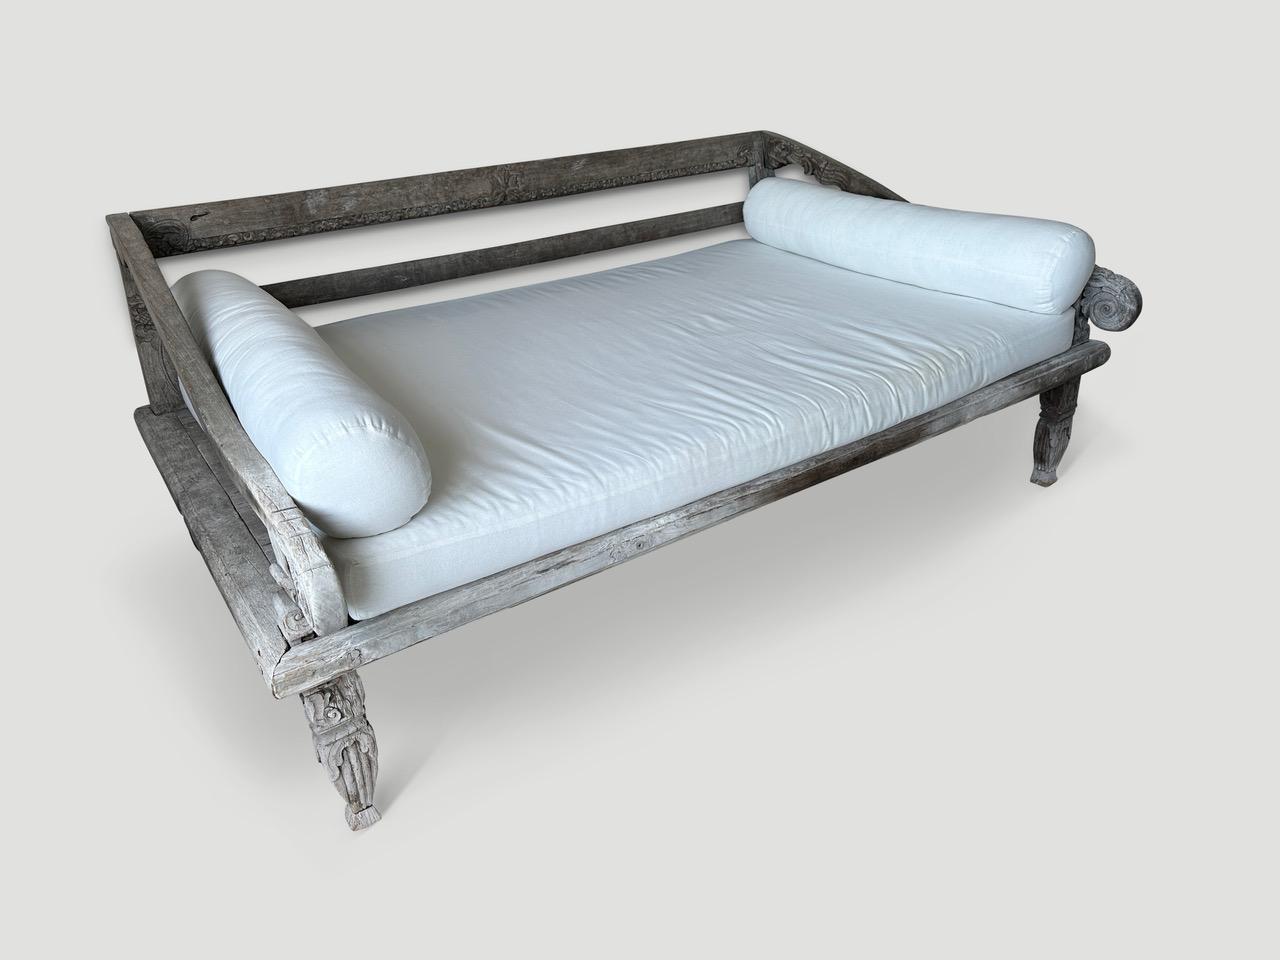 Rare antique teak day bed from the island of Madura. The patina on the wood is stunning. Circa 1900. The length of the arm is 48.5 and hand carved from one piece of wood. Taken from my finest collection and impossible to source now. For the